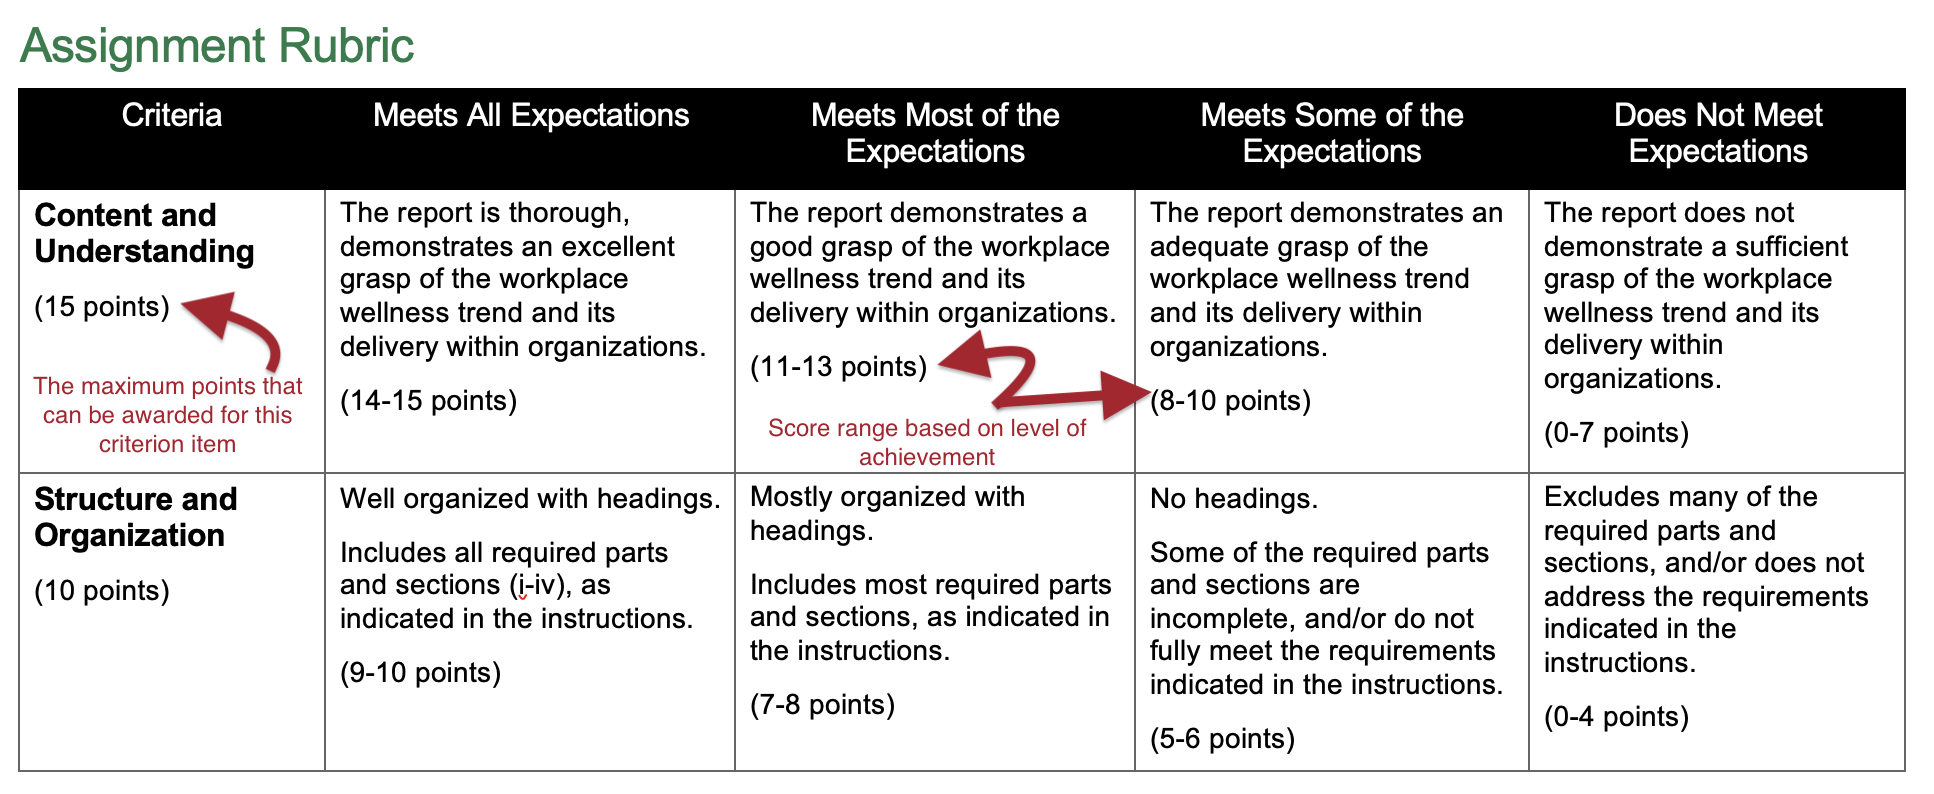 Image of an assignment rubric with arrows indicating the maximum points for criterion item and score range available based on the level of achievement